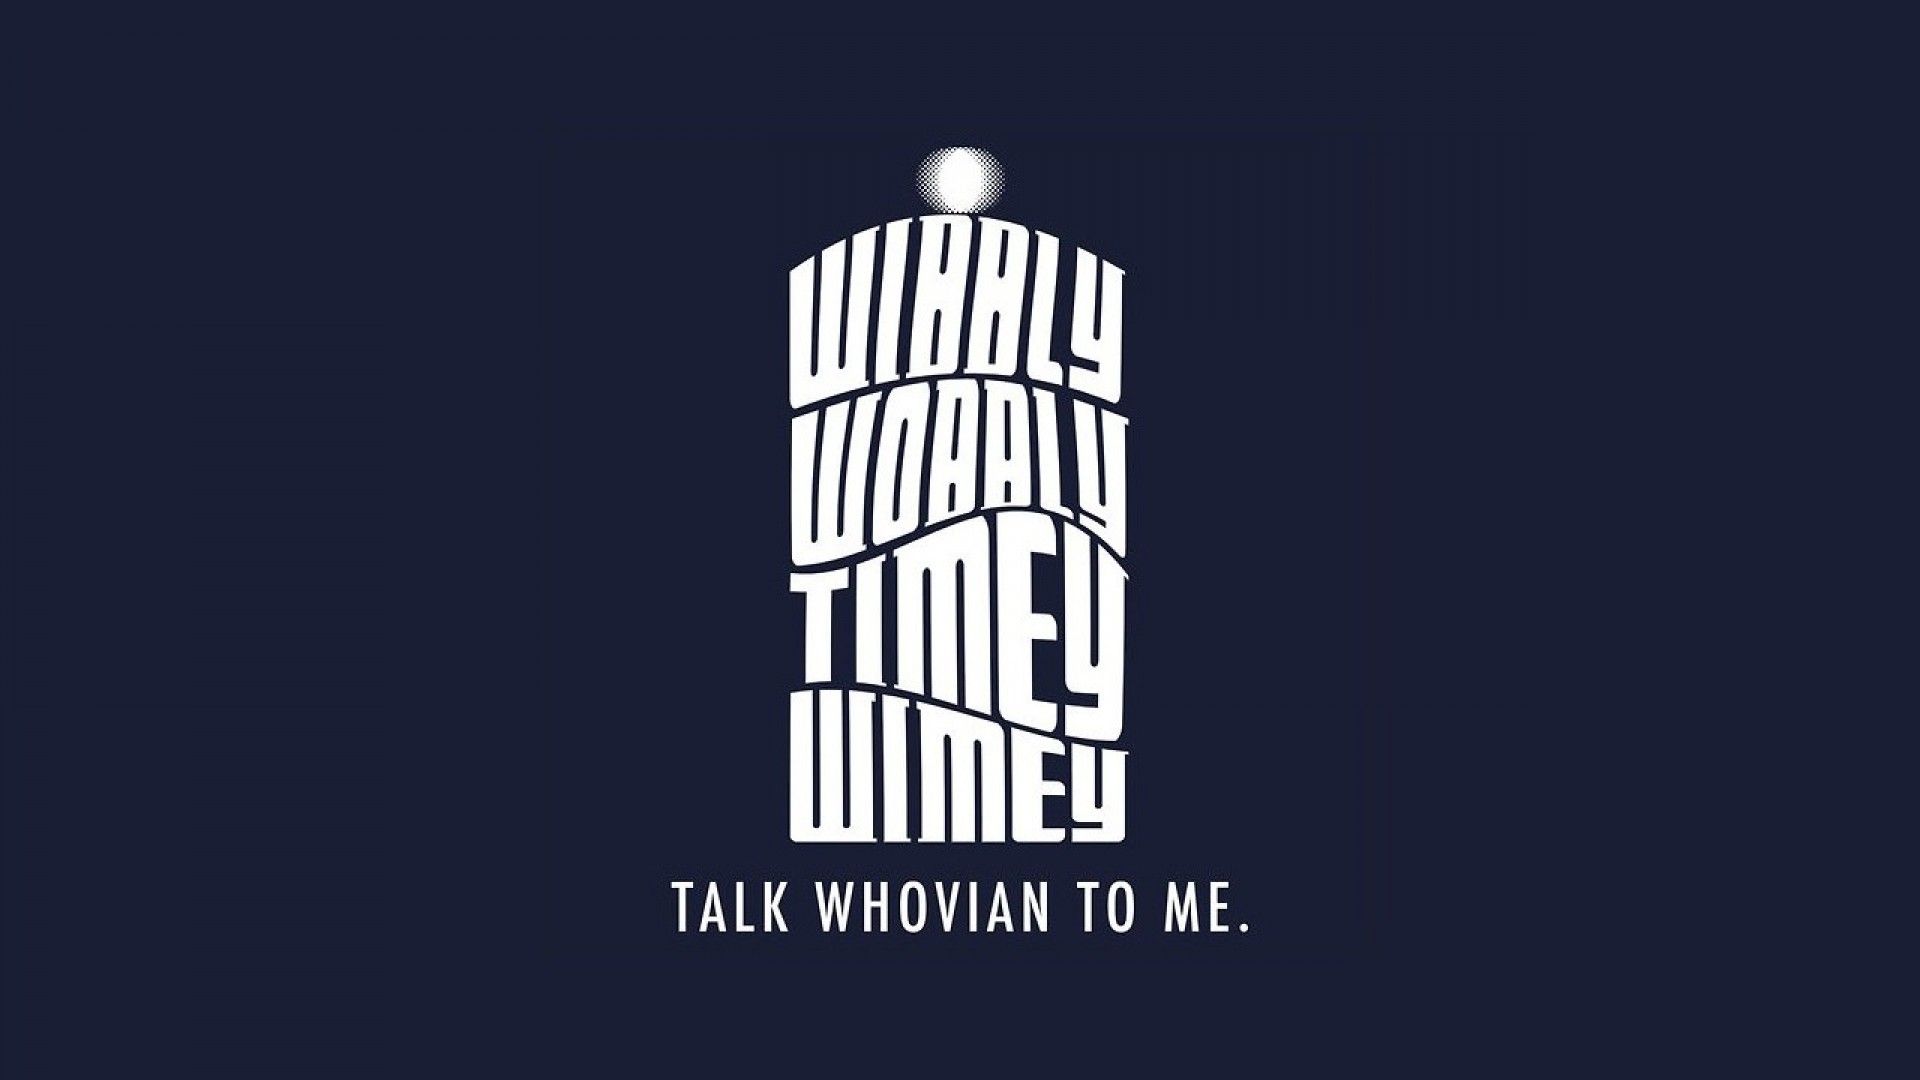 Free download Doctor Who Quotes Wallpaper QuotesGram [1920x1080] for your Desktop, Mobile & Tablet. Explore Doctor Who Tardis Wallpaper. Doctor Who Wallpaper, Doctor Who Moving Wallpaper, Dr Who Inside Tardis Wallpaper